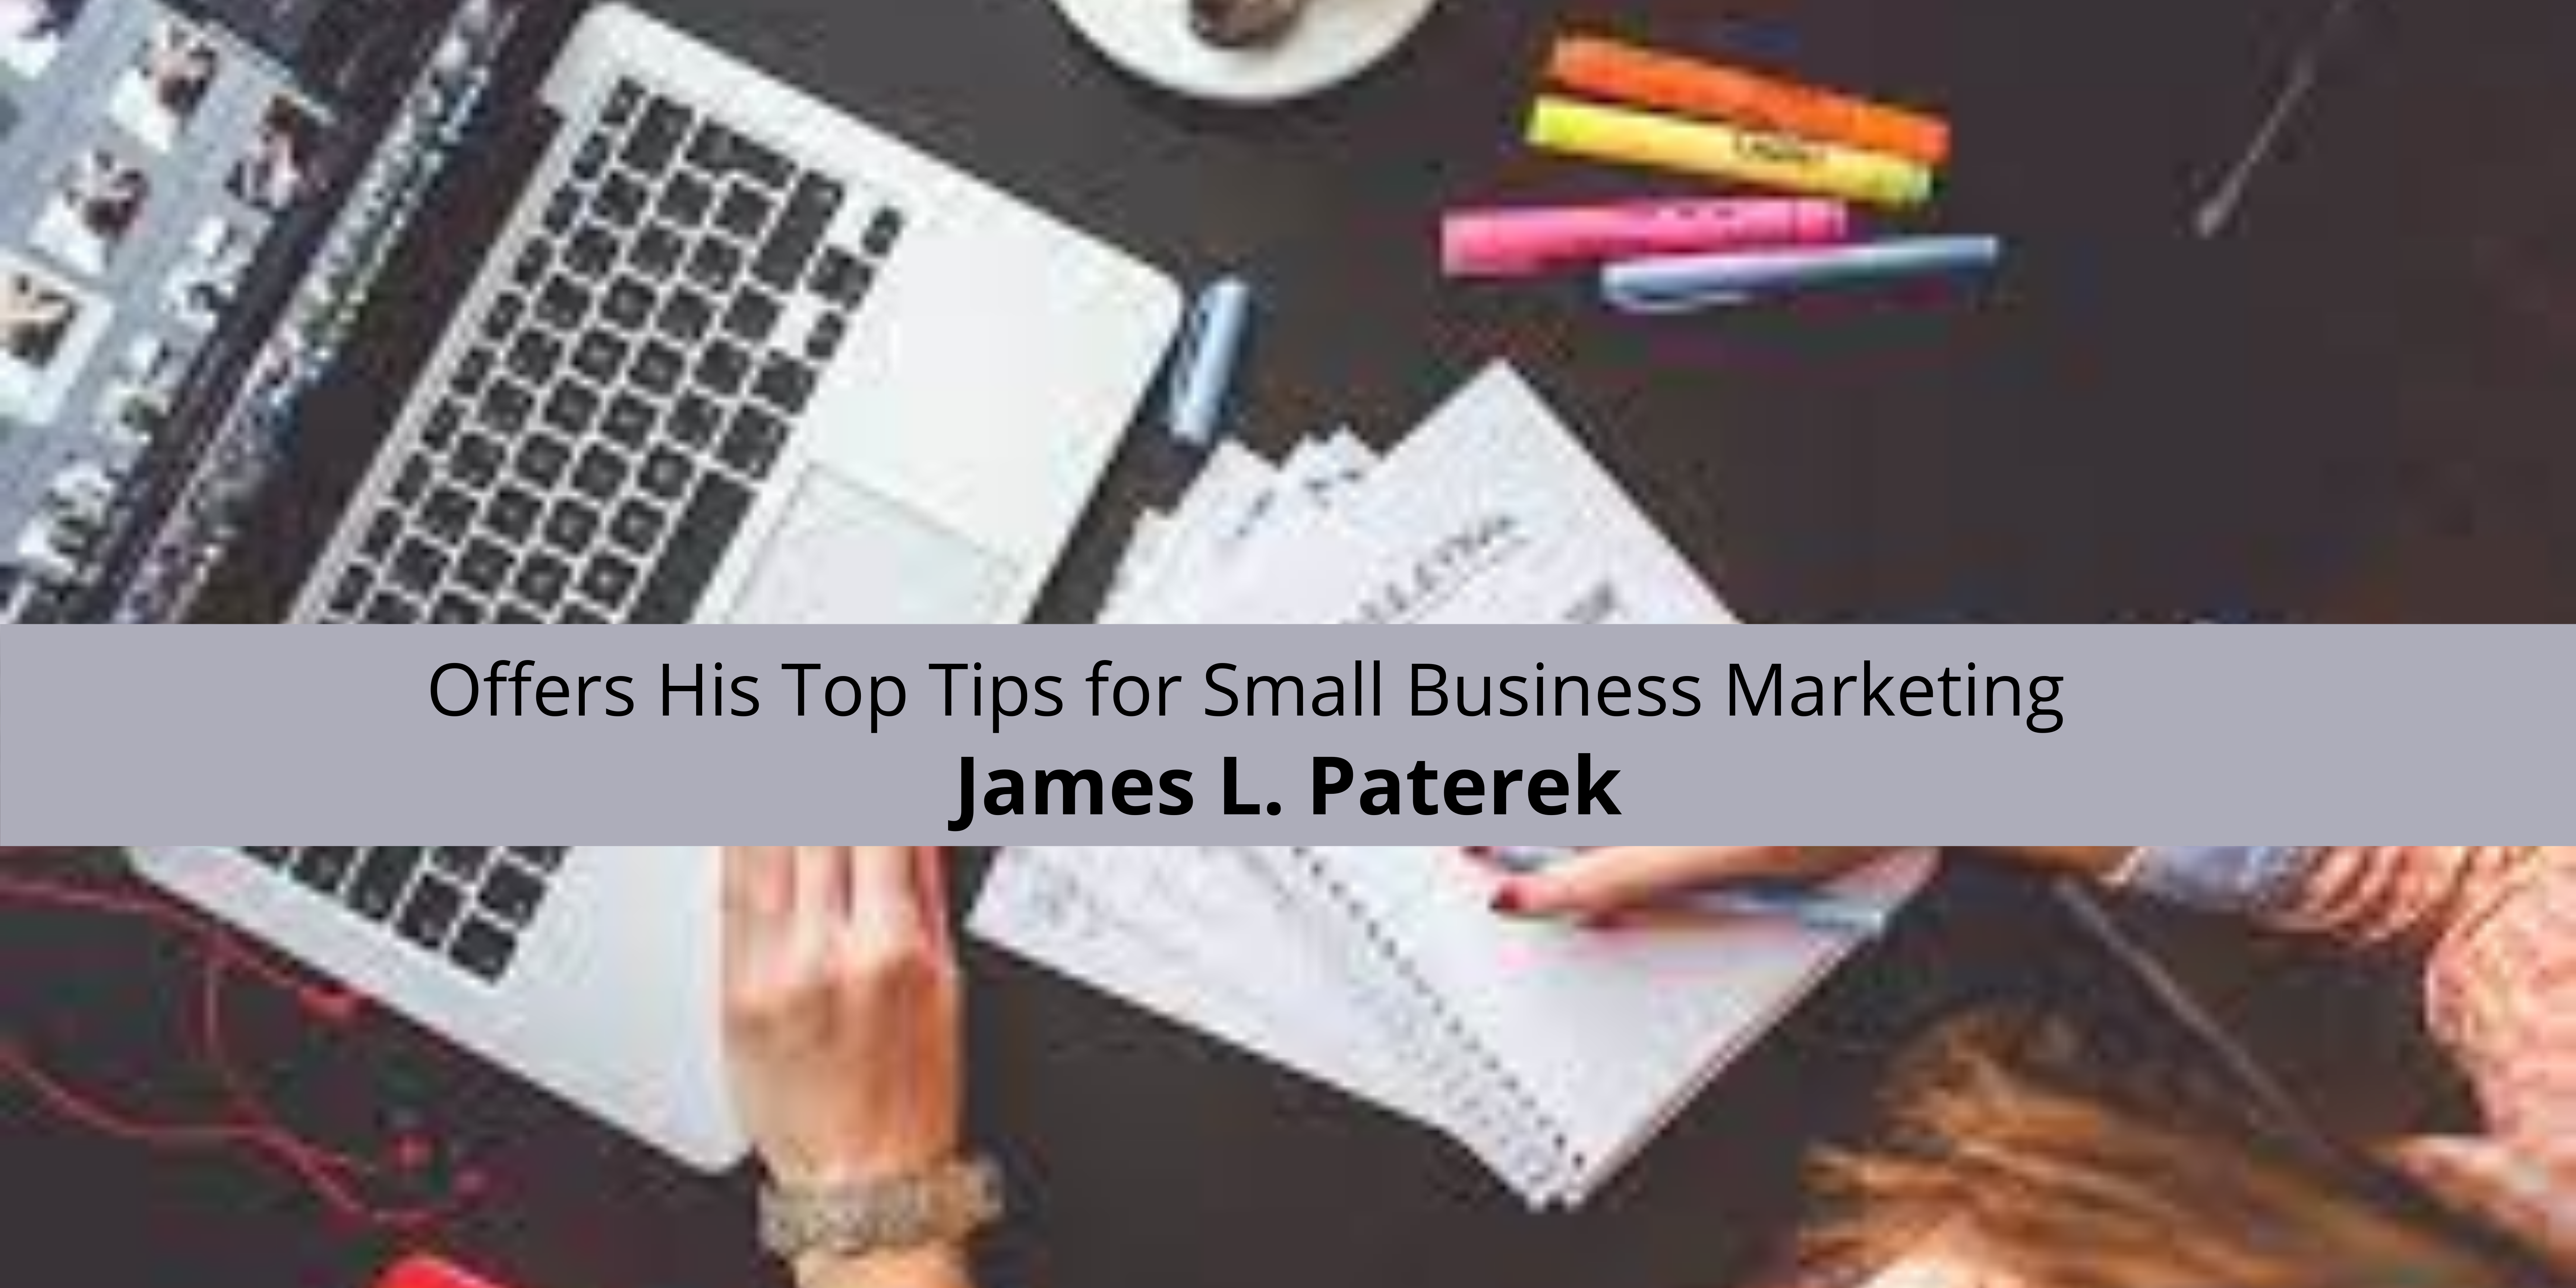 James L. Paterek Offers His Top Tips for Small Business Marketing